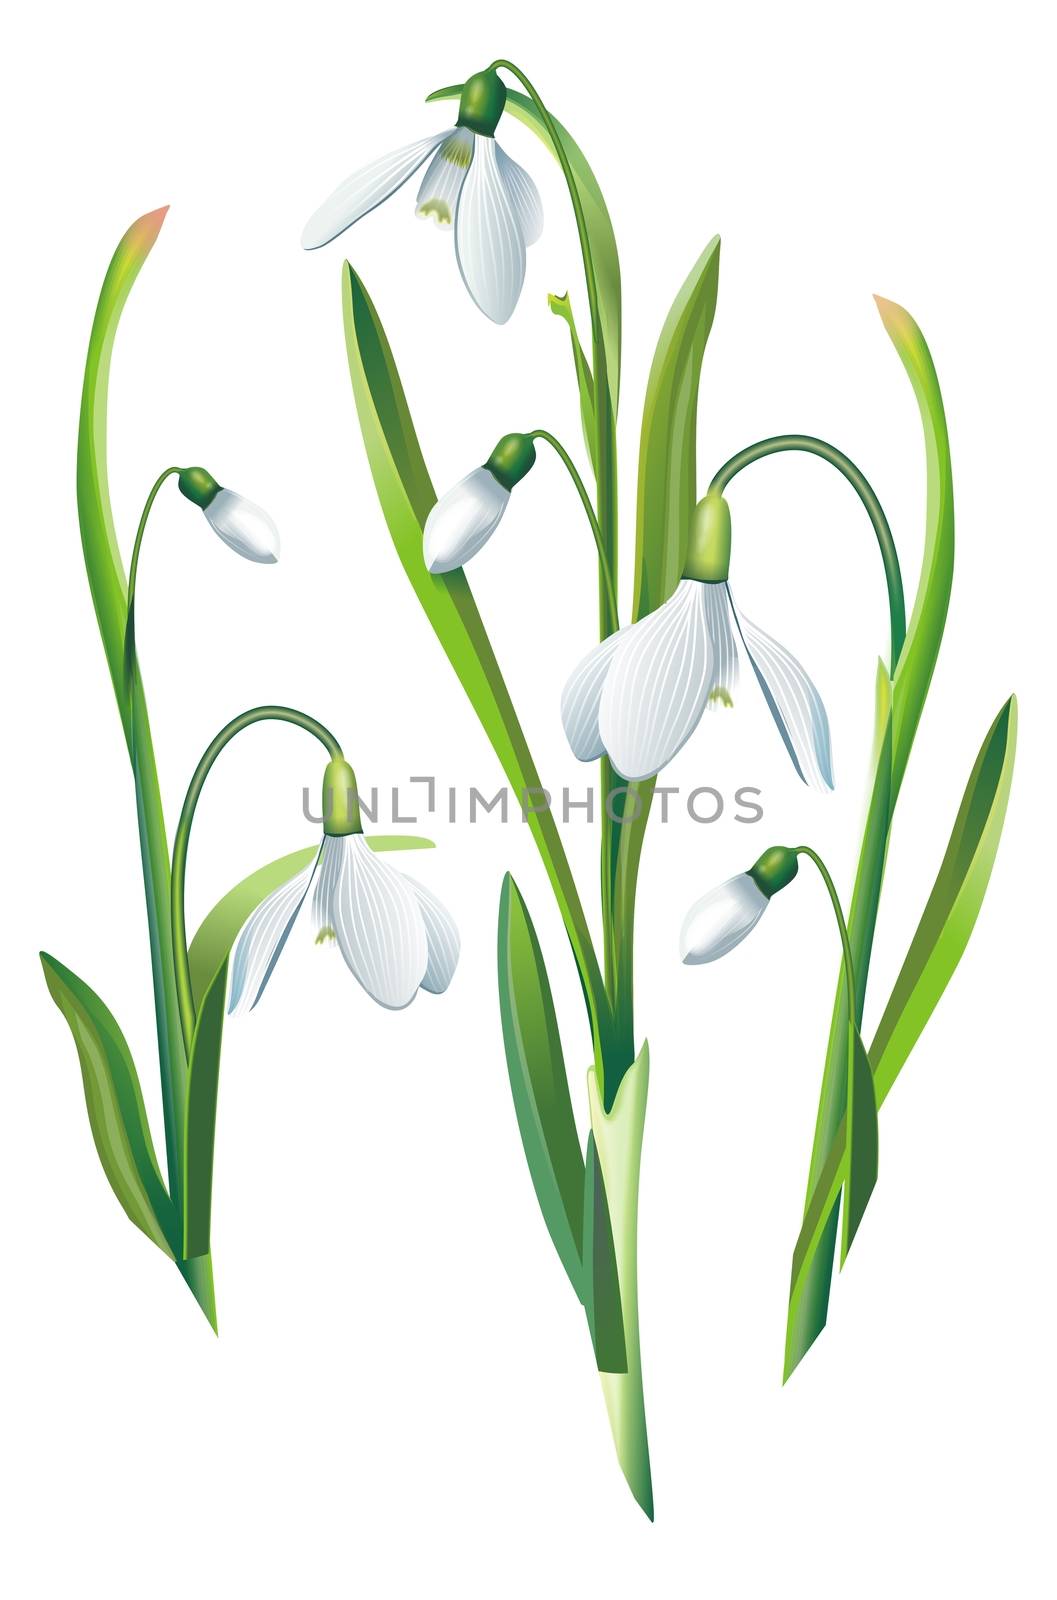 Snowdrop Flowers Isolated by welcomia